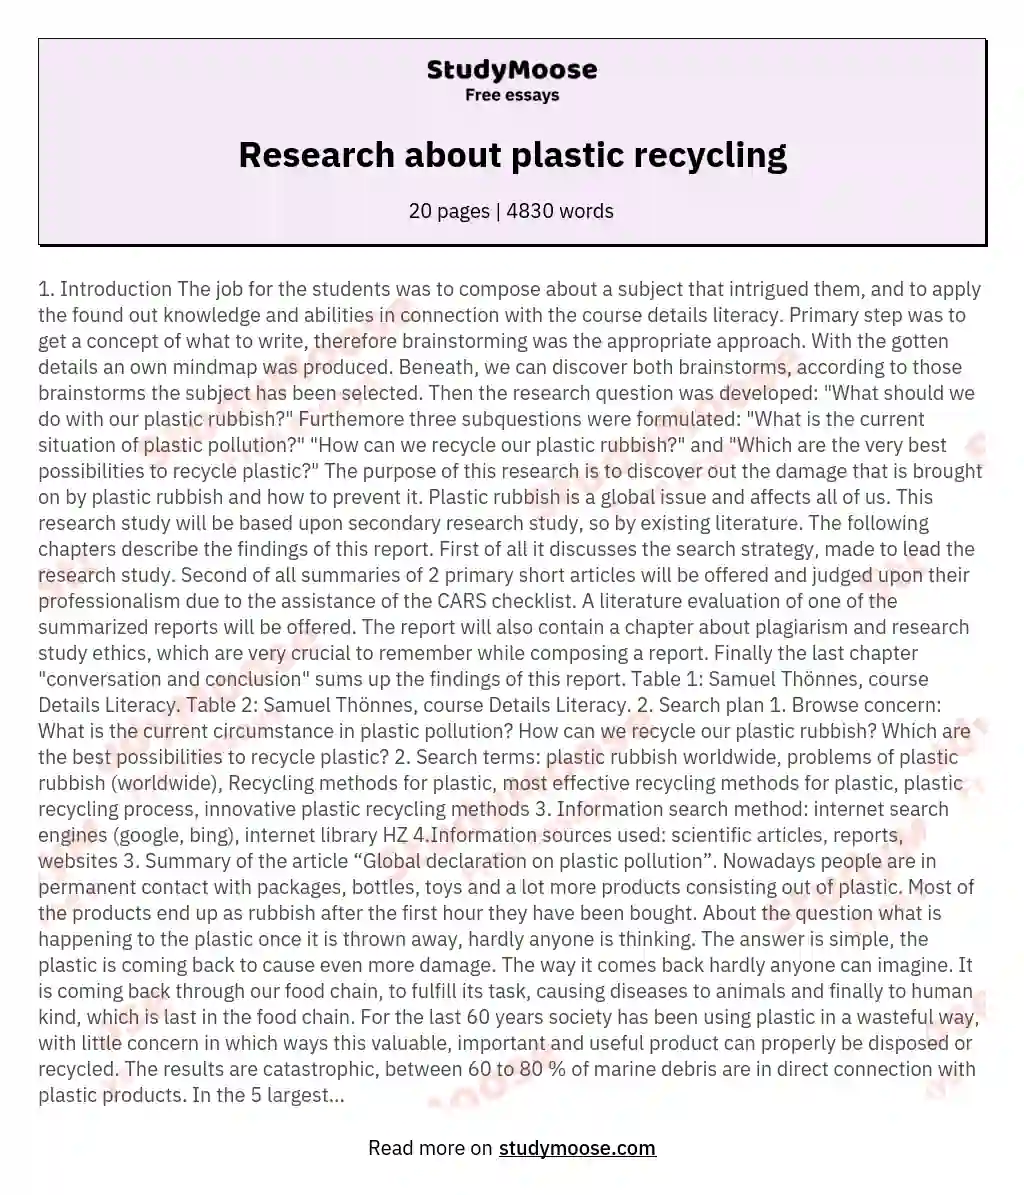 Research about plastic recycling essay